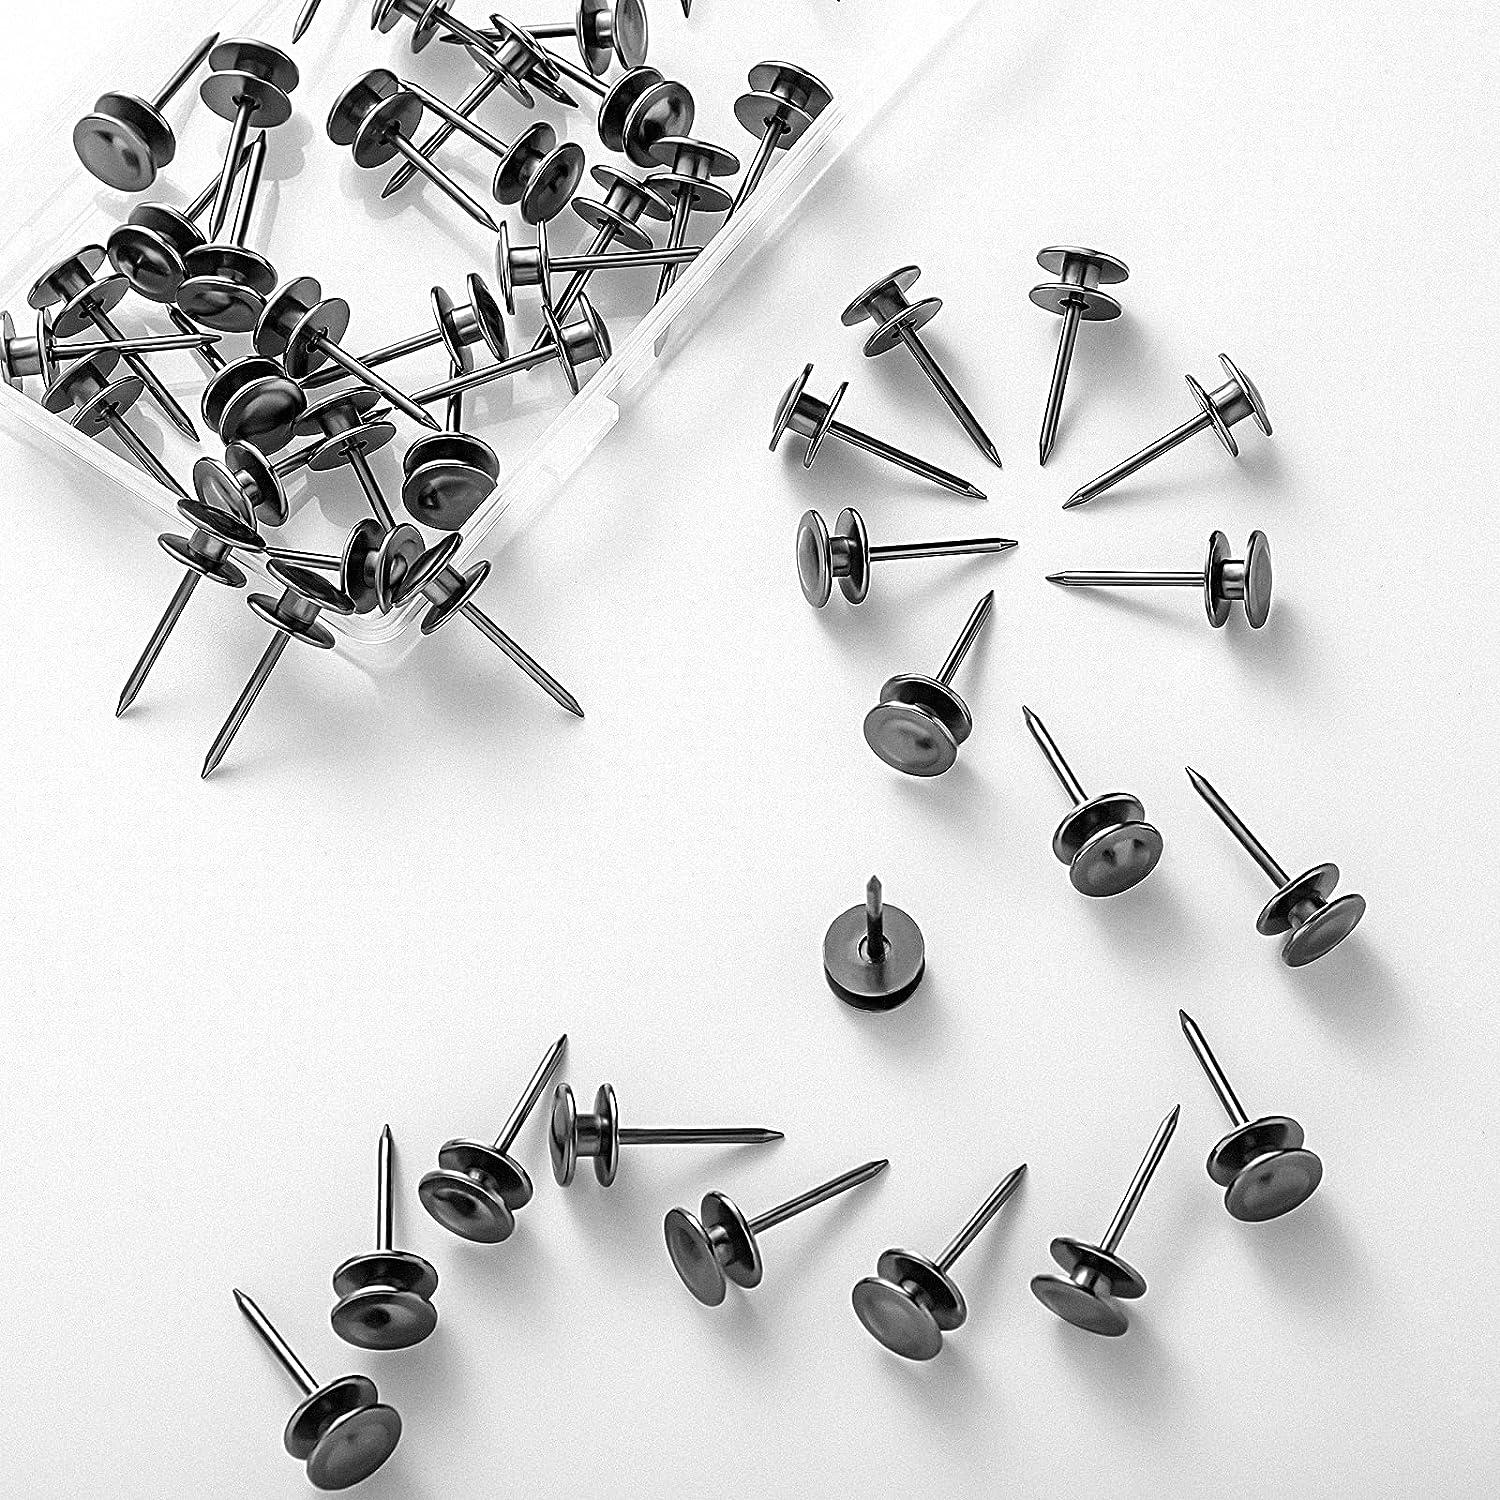 50 Pieces Black Push Pin Metal Wall Hooks Picture Hanging Pin Home Office